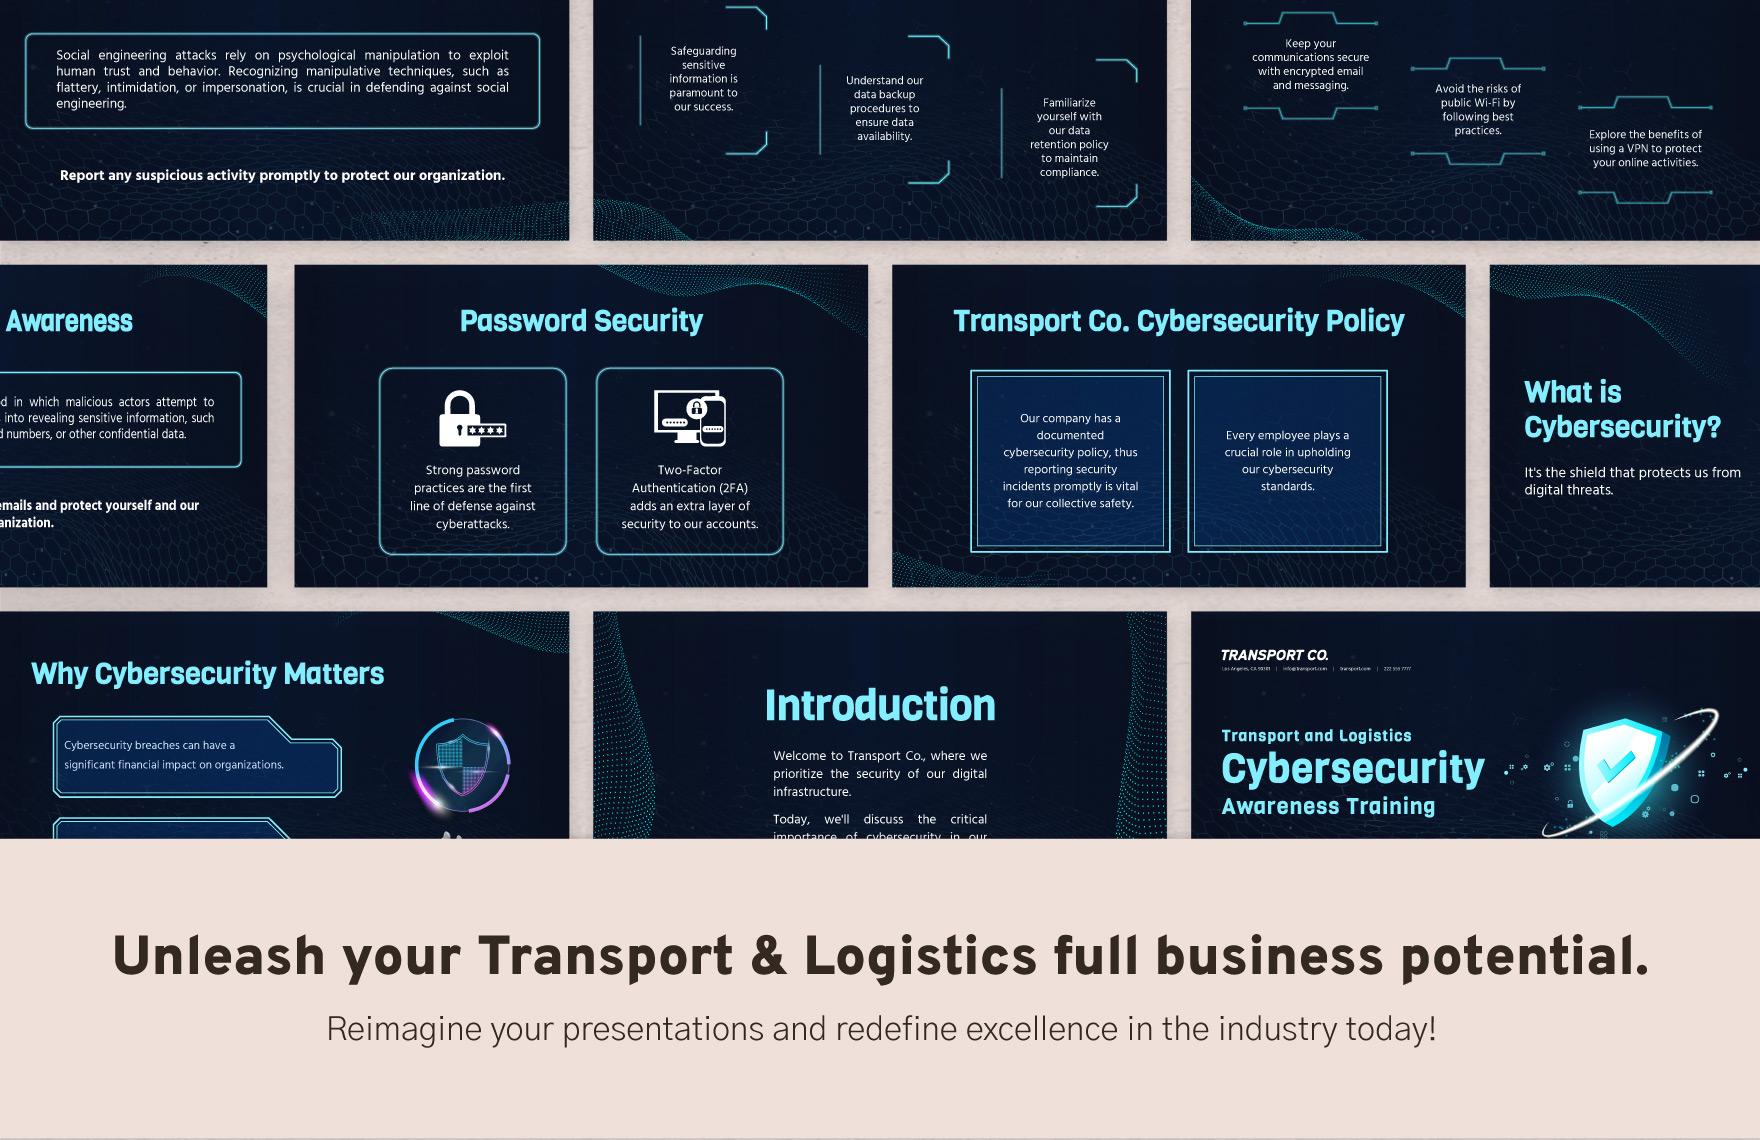 Transport and Logistics Cybersecurity Awareness Training Template